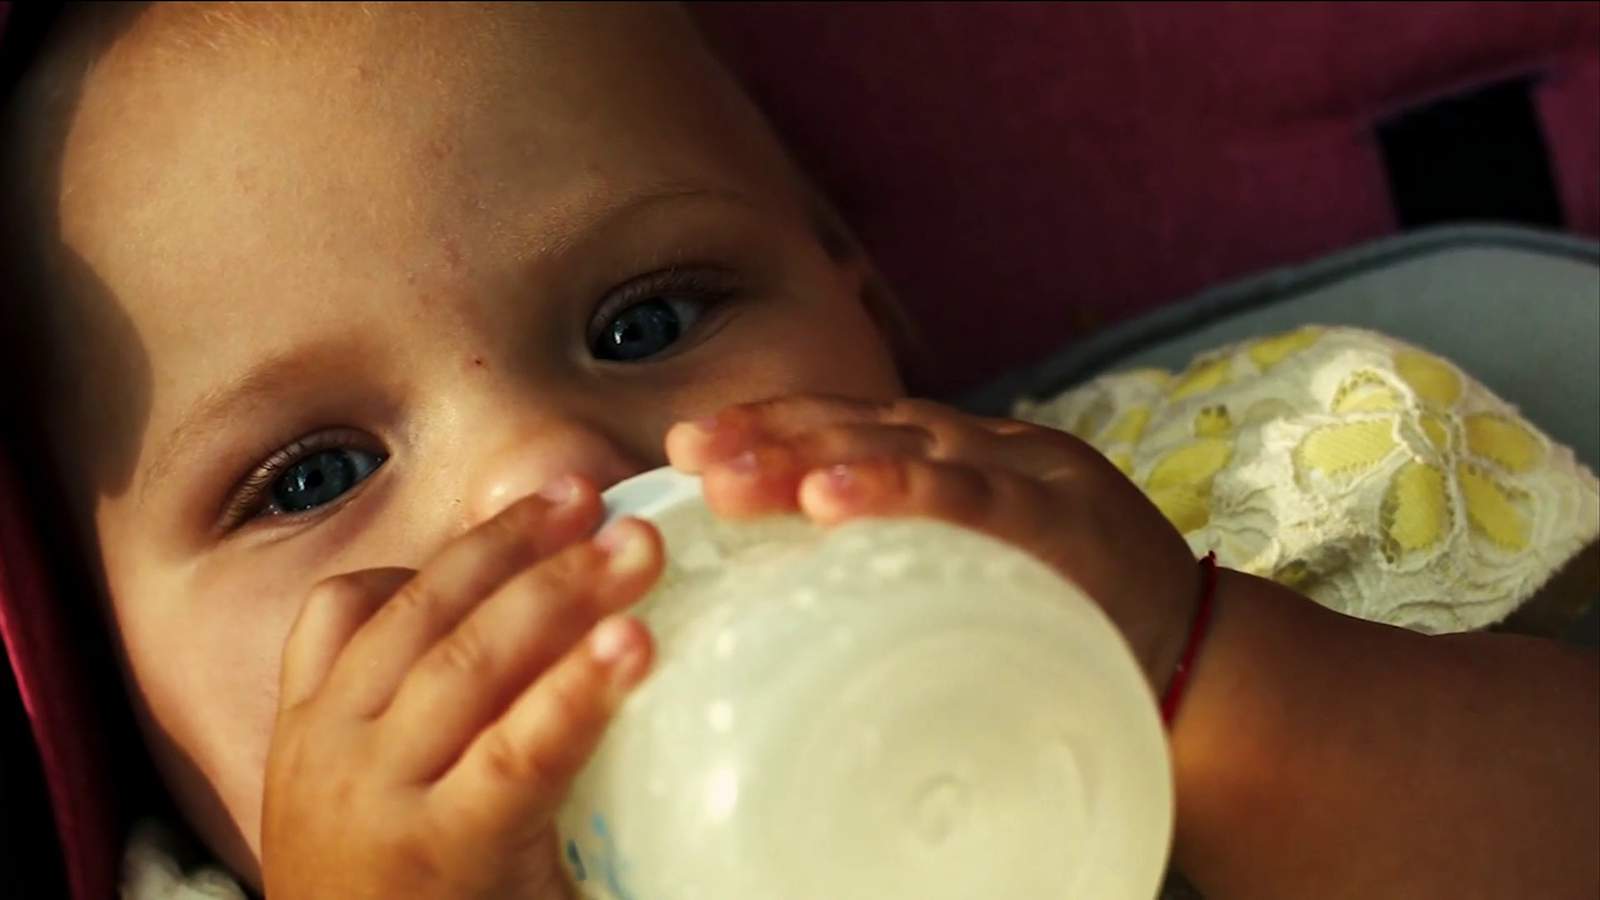 Health alert: FDA warns parents not to make or feed homemade formula to infants